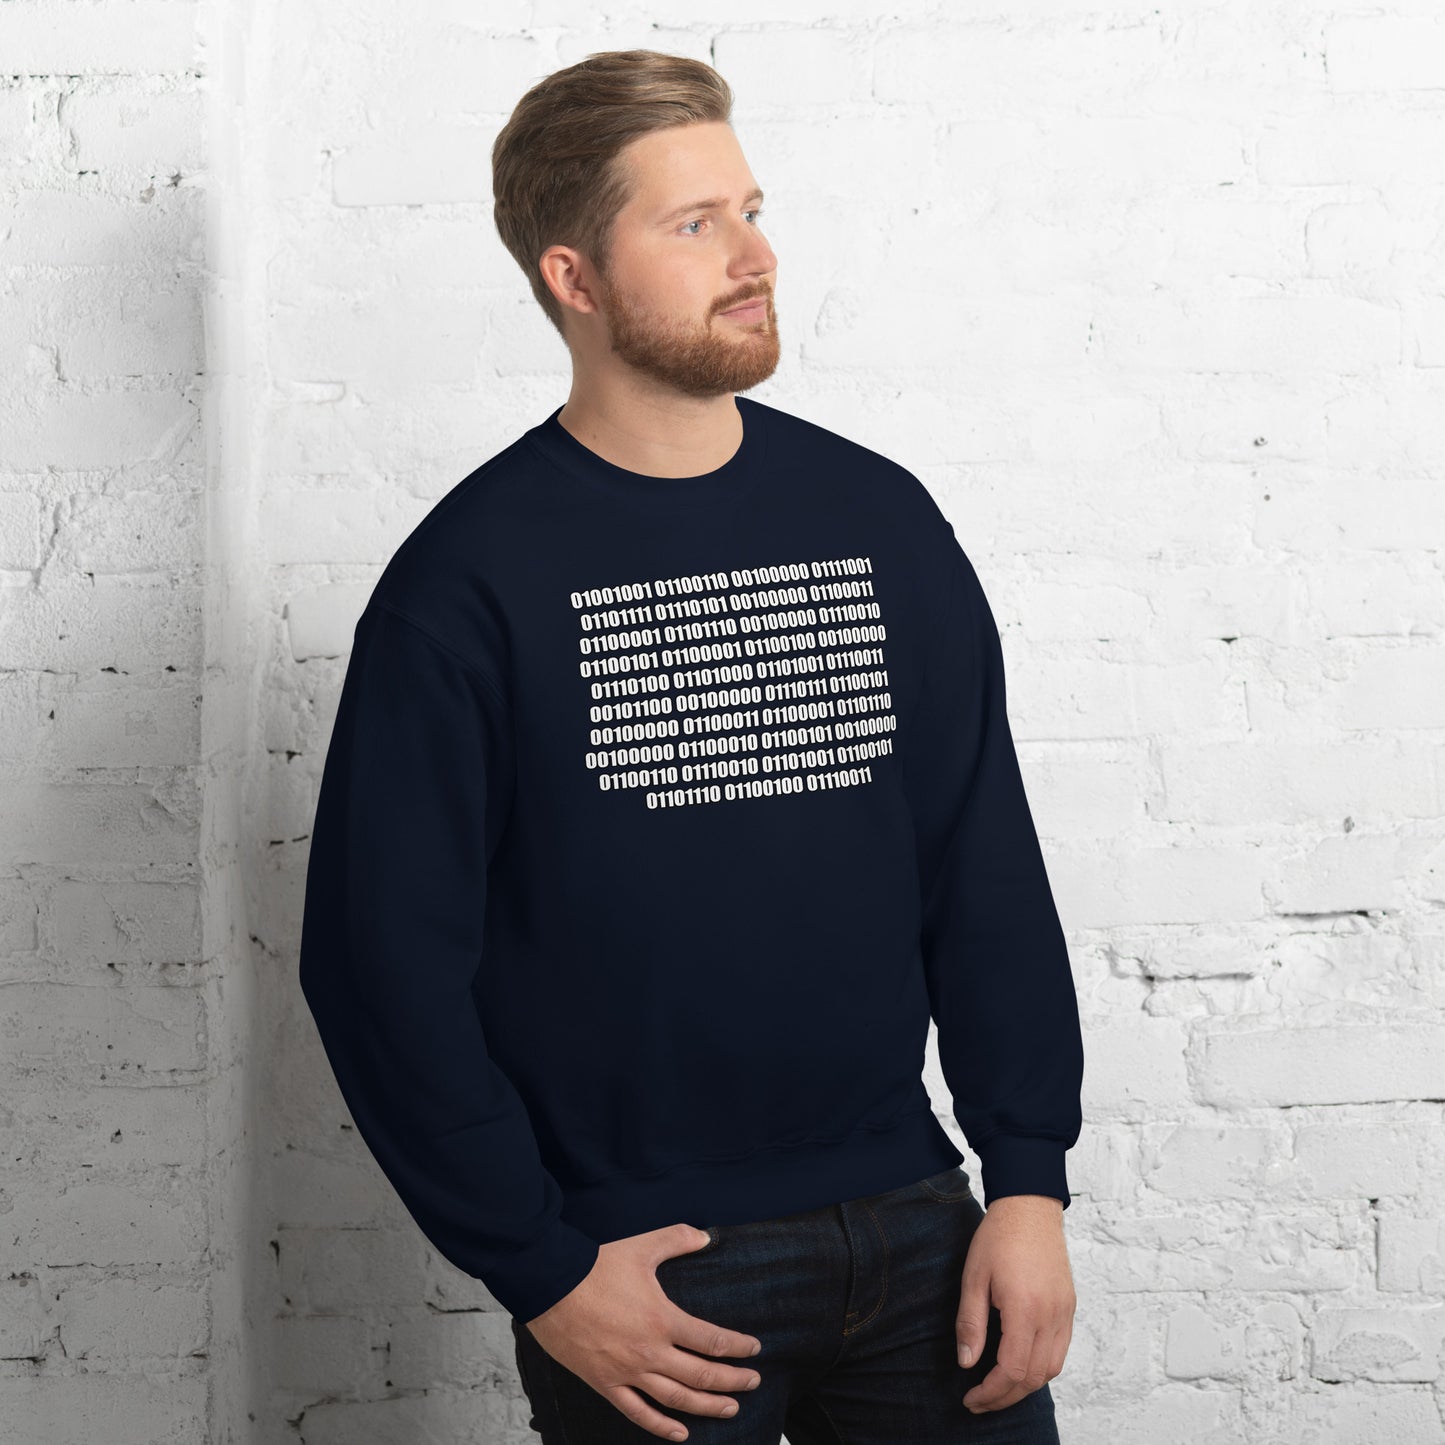 Men with navy sweatshirt with binaire text "If you can read this"